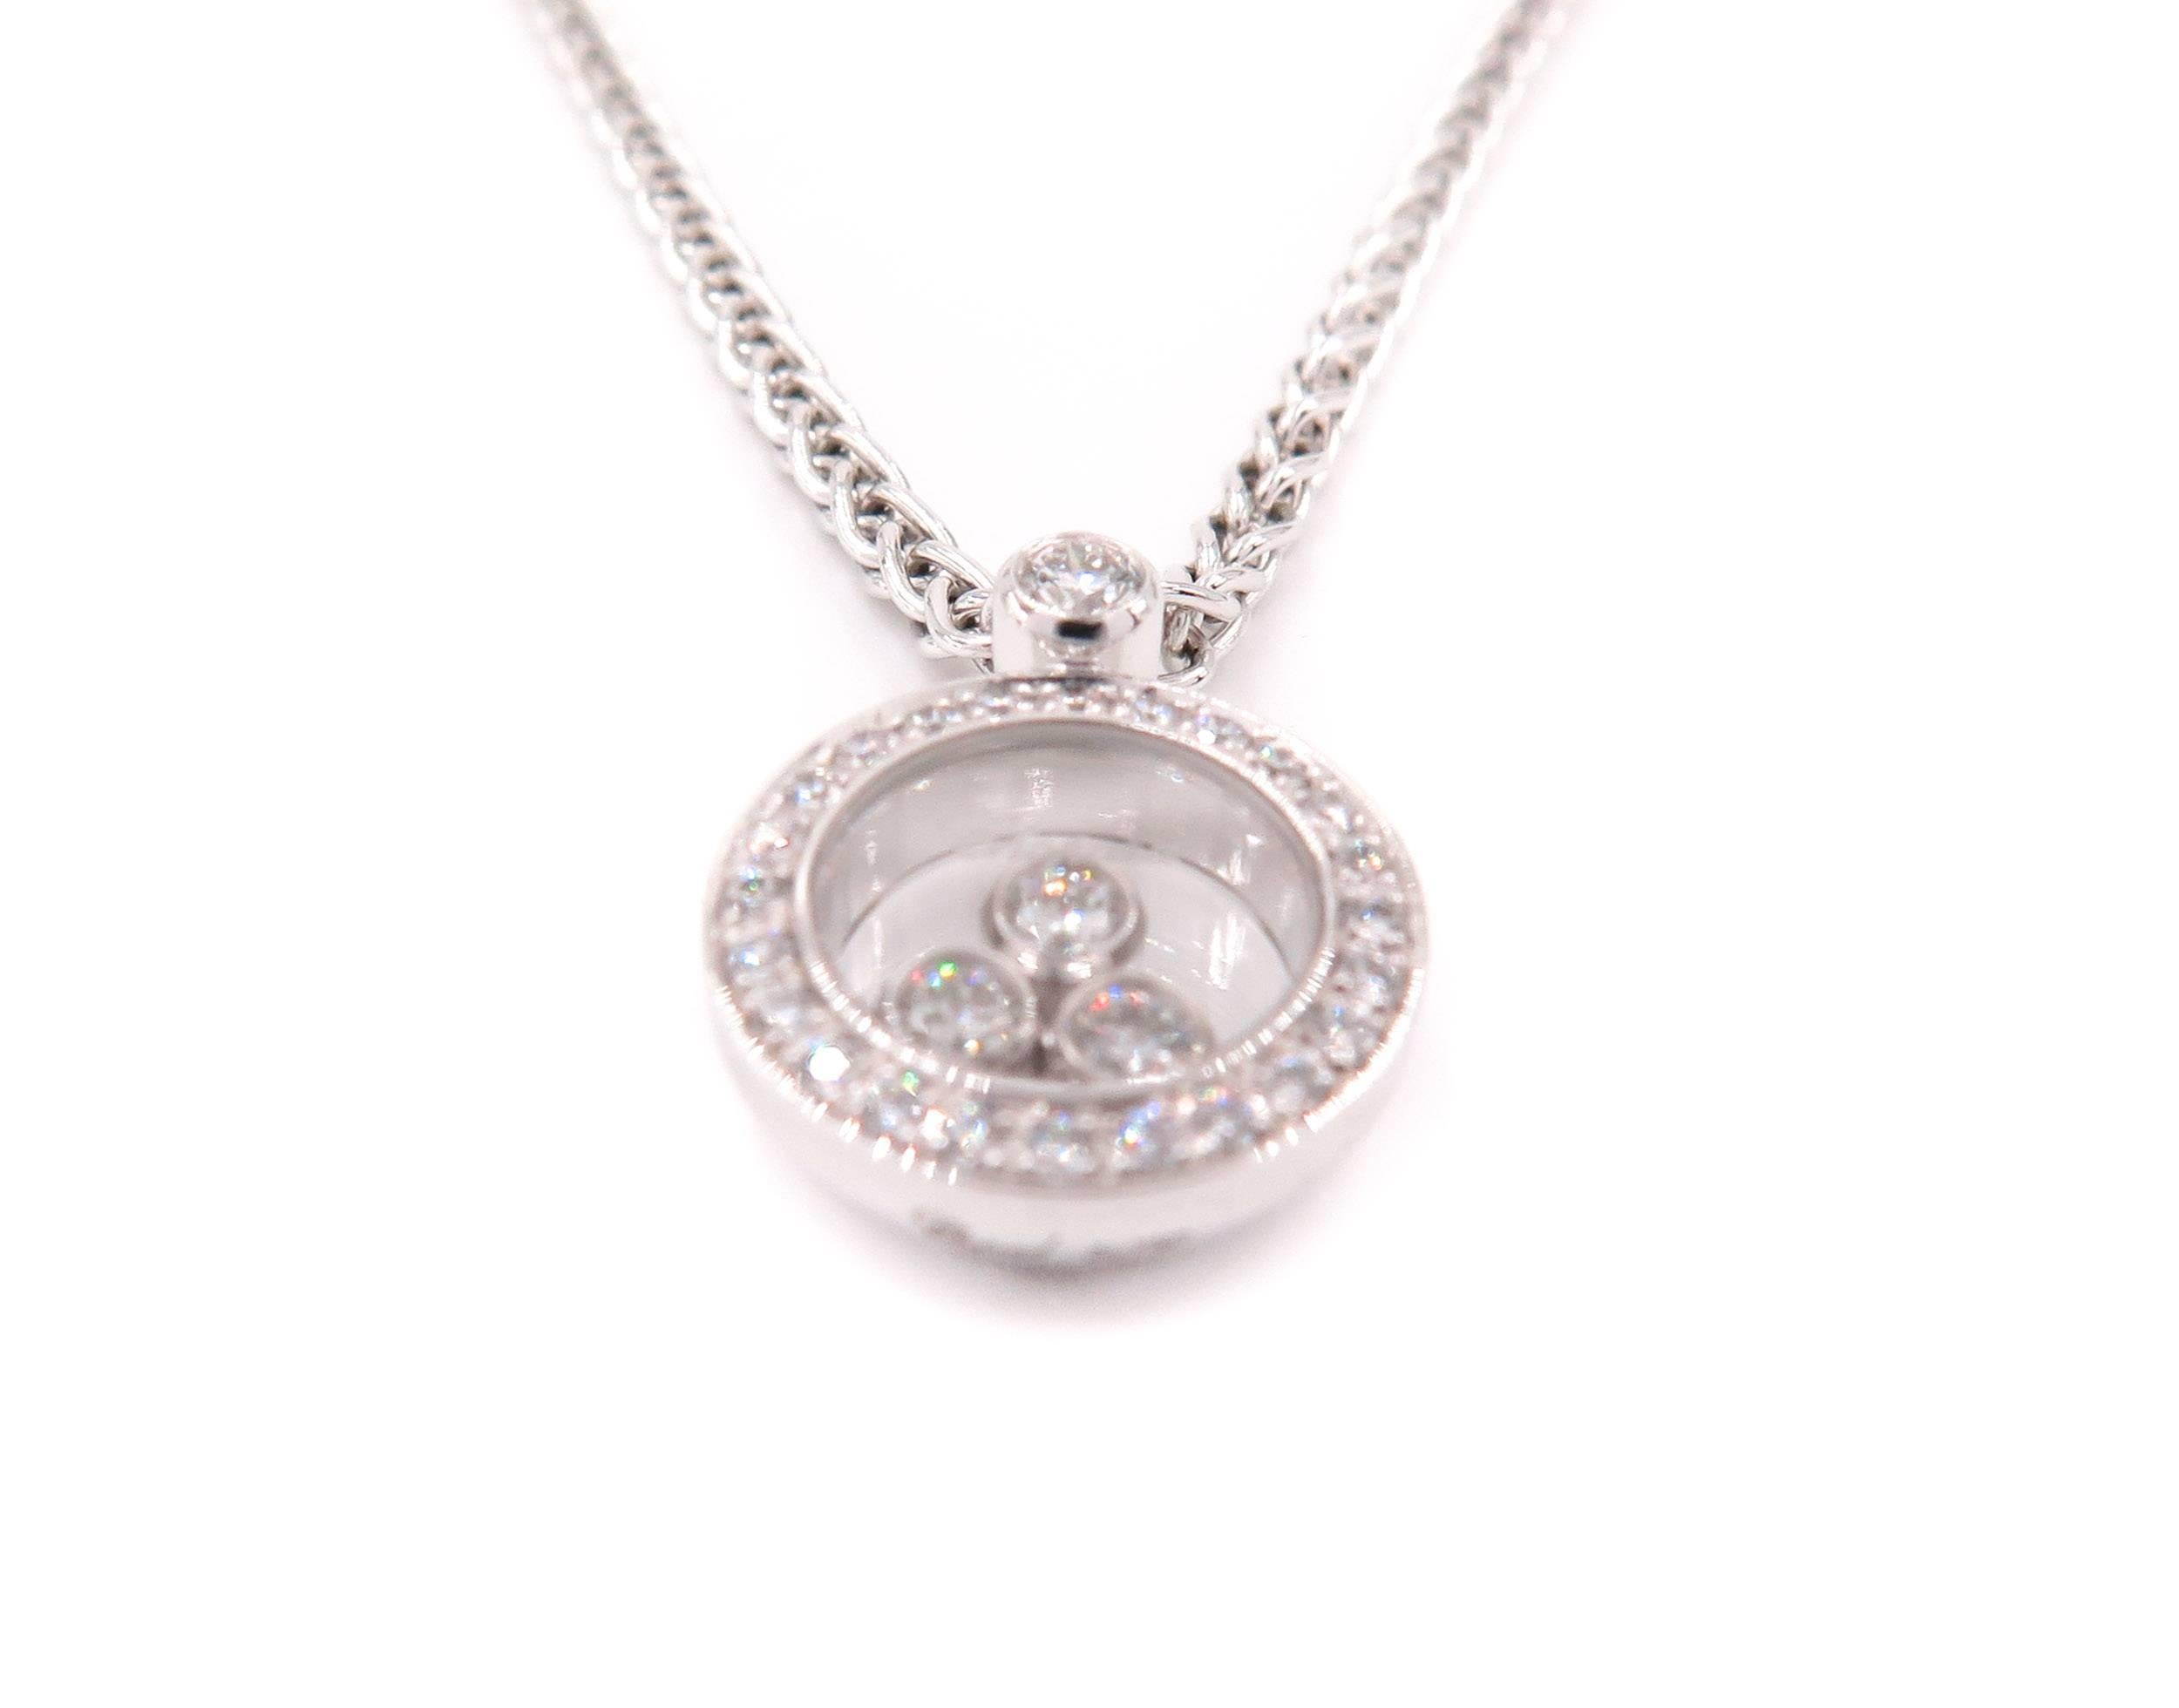 This Chopard pendant blends the pretty femininity of gentle curves with a highly contemporary look. Within the two sapphire crystals of this round pendant in 18k white gold, a dazzling bezel of diamonds frame the moving diamonds floating freely in